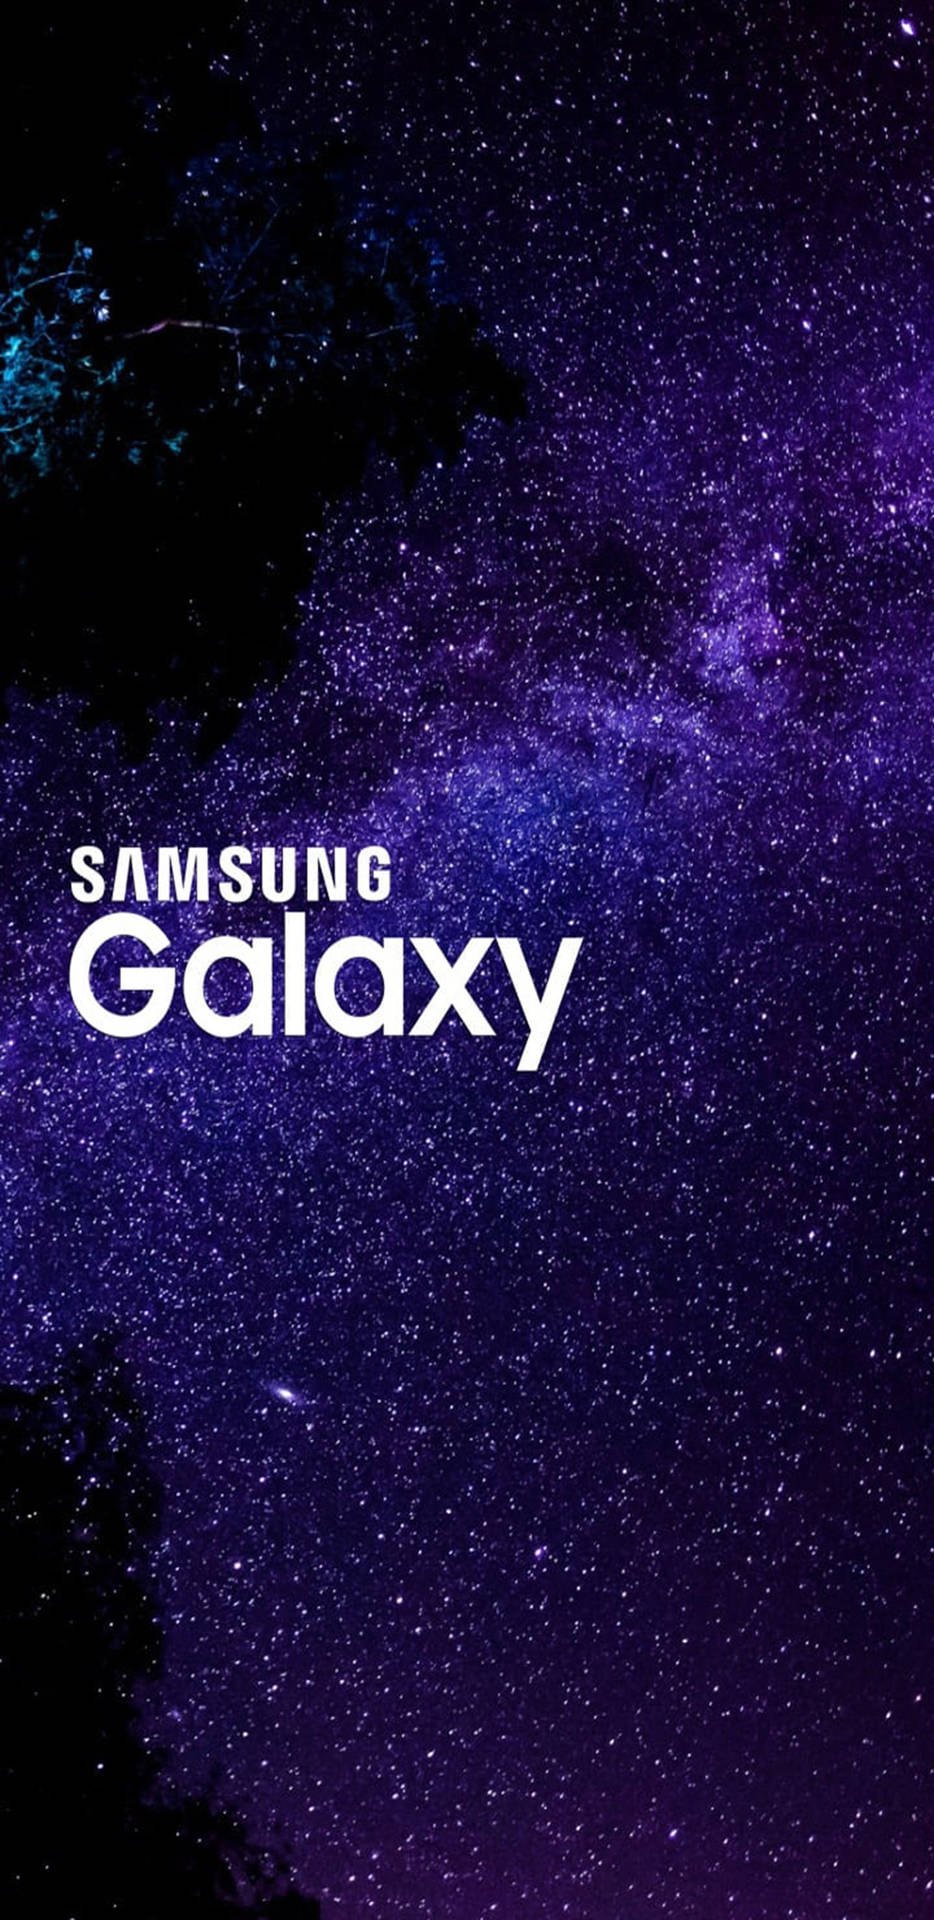 Free Samsung Galaxy Wallpaper Downloads, [300+] Samsung Galaxy Wallpapers  for FREE 